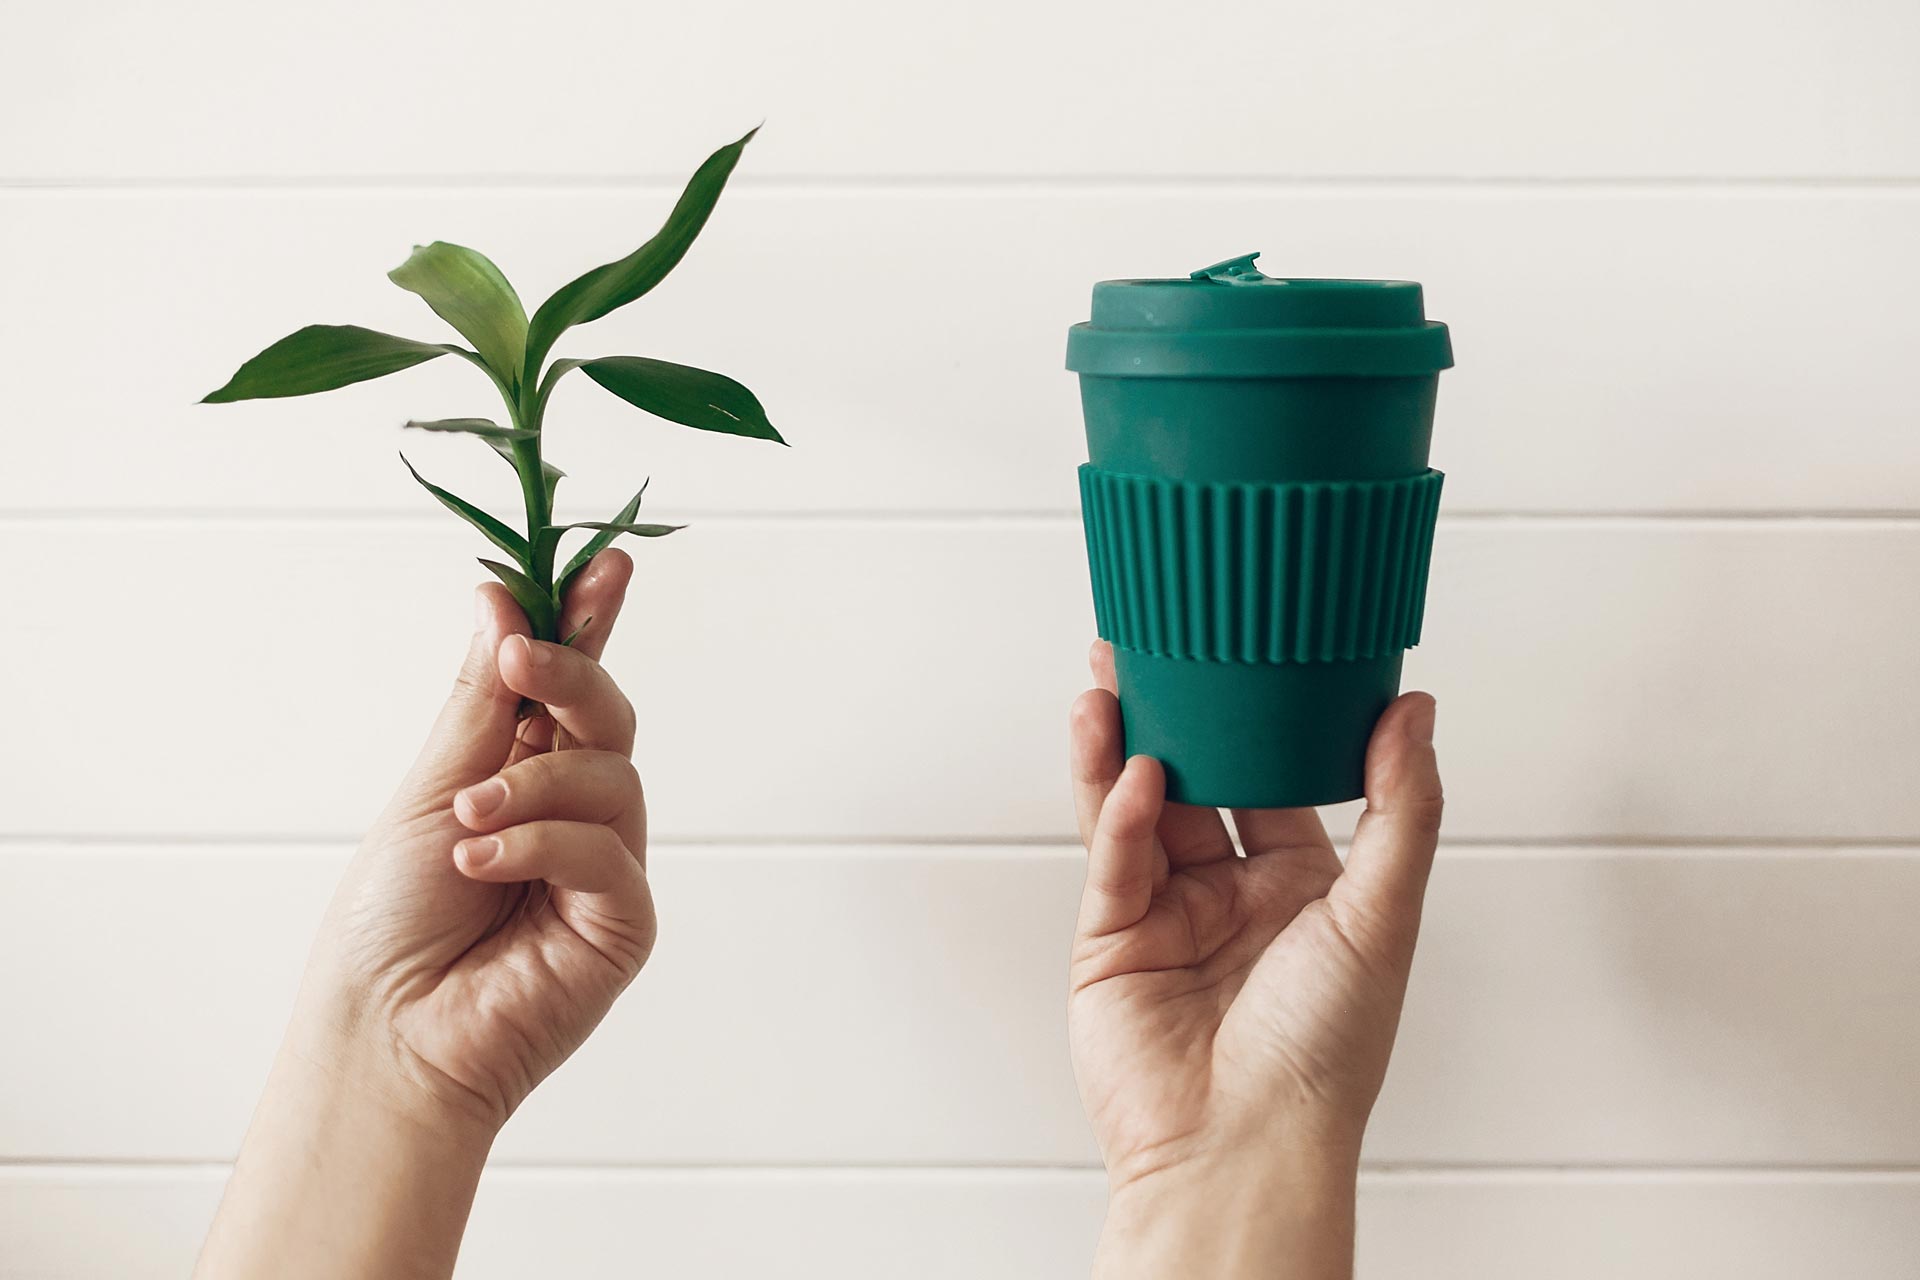 Hands holding up green plant stem and reusable coffee mug, depicting zero waste vs low impact dilemma